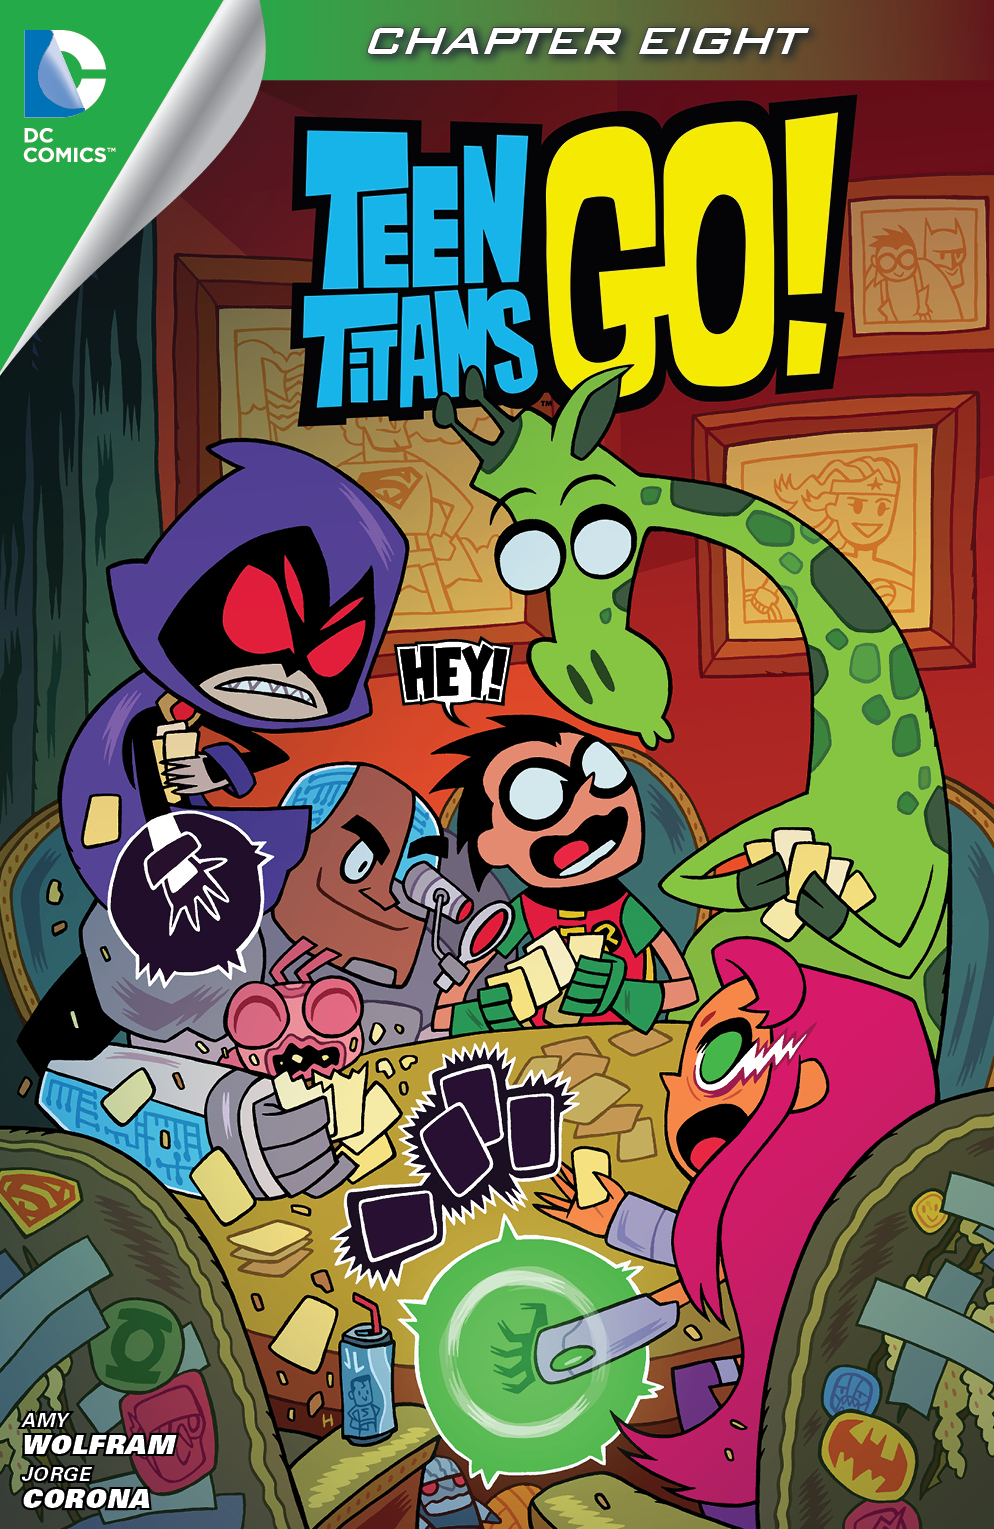 Teen Titans Go! (2013-) #8 preview images